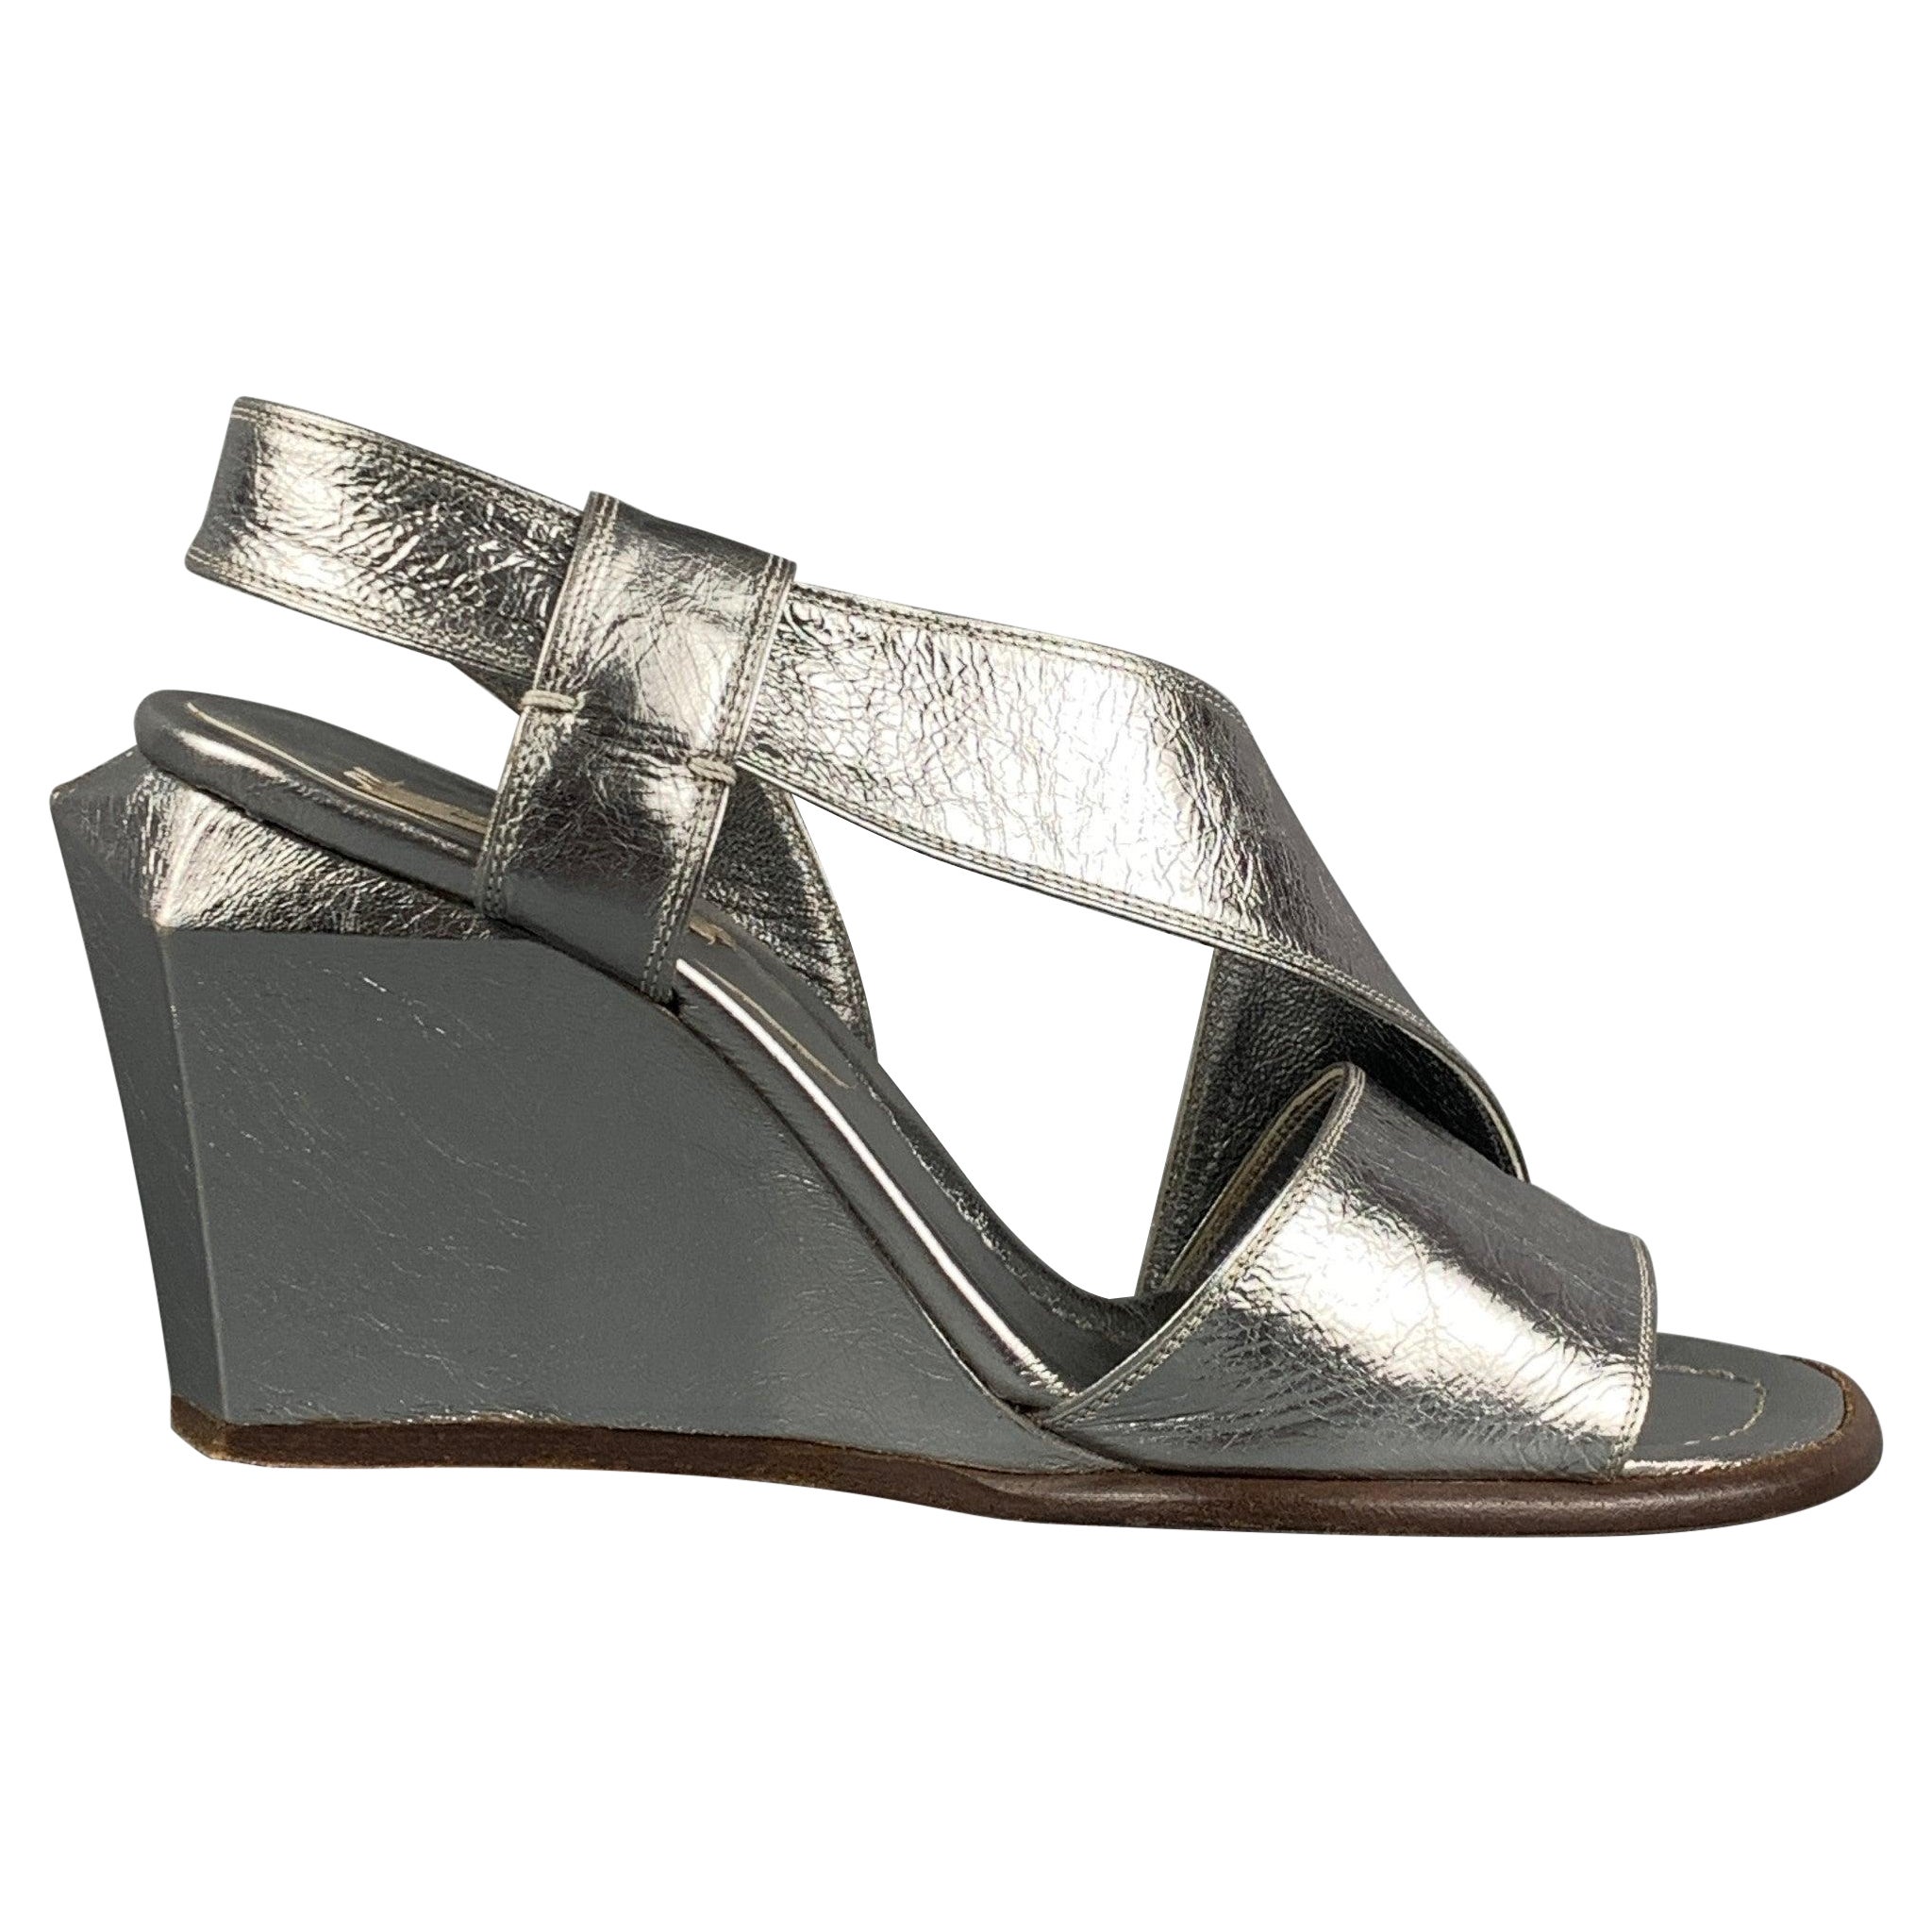 MARC JACOBS Size 7 Silver Leather Wedge Nickel Sandals For Sale